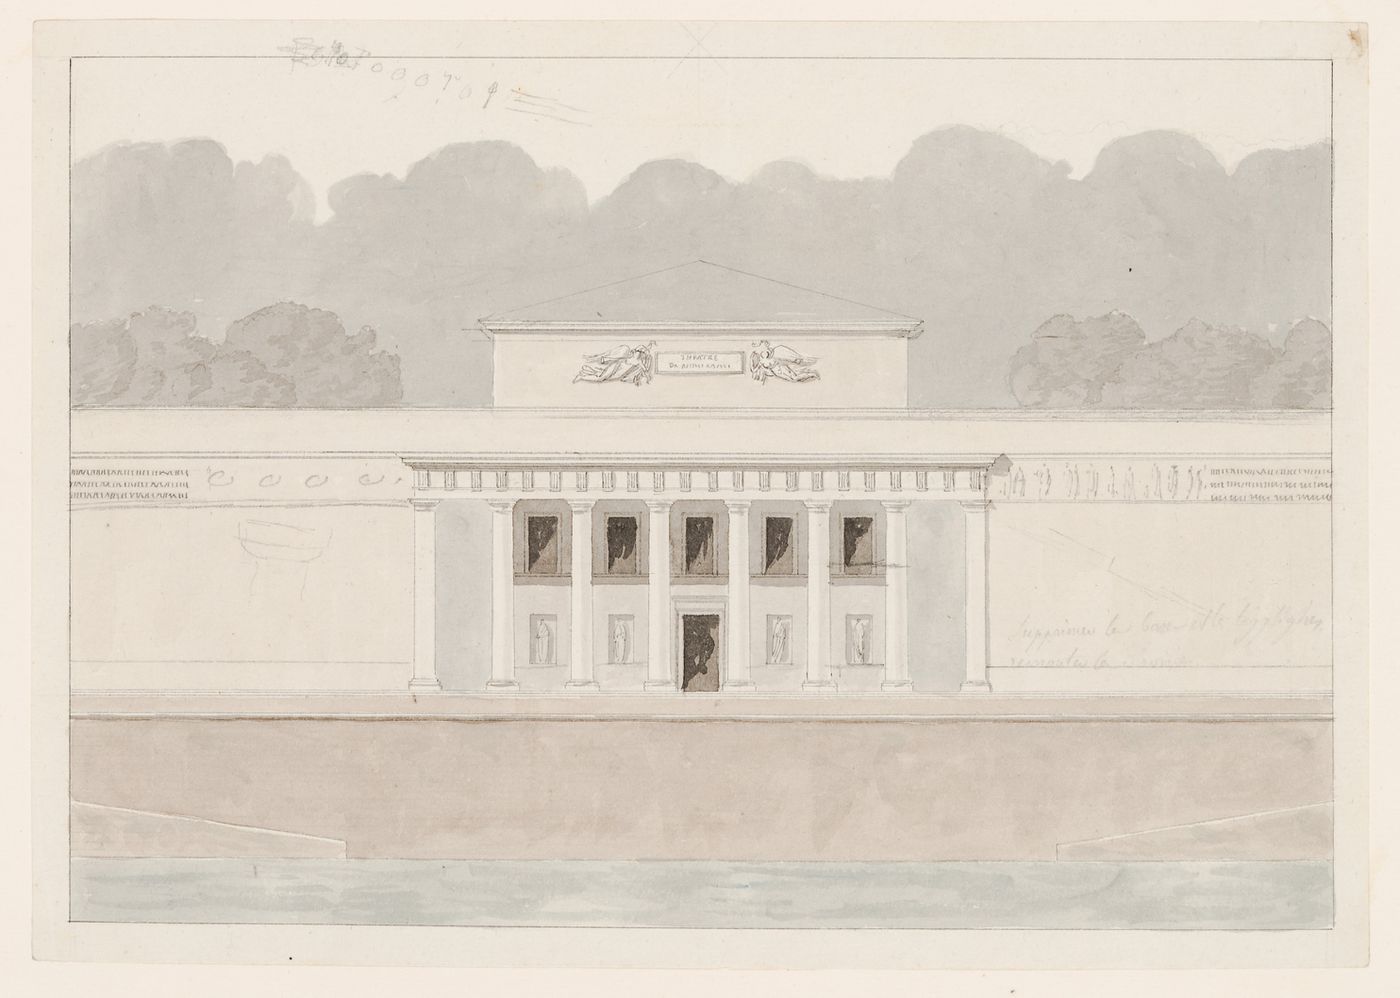 1802 Grand Prix Competition: Partial plan, elevation and partial cross section for a public fair on the banks of a large river showing a small theatre and ground floor plan for a small theatre